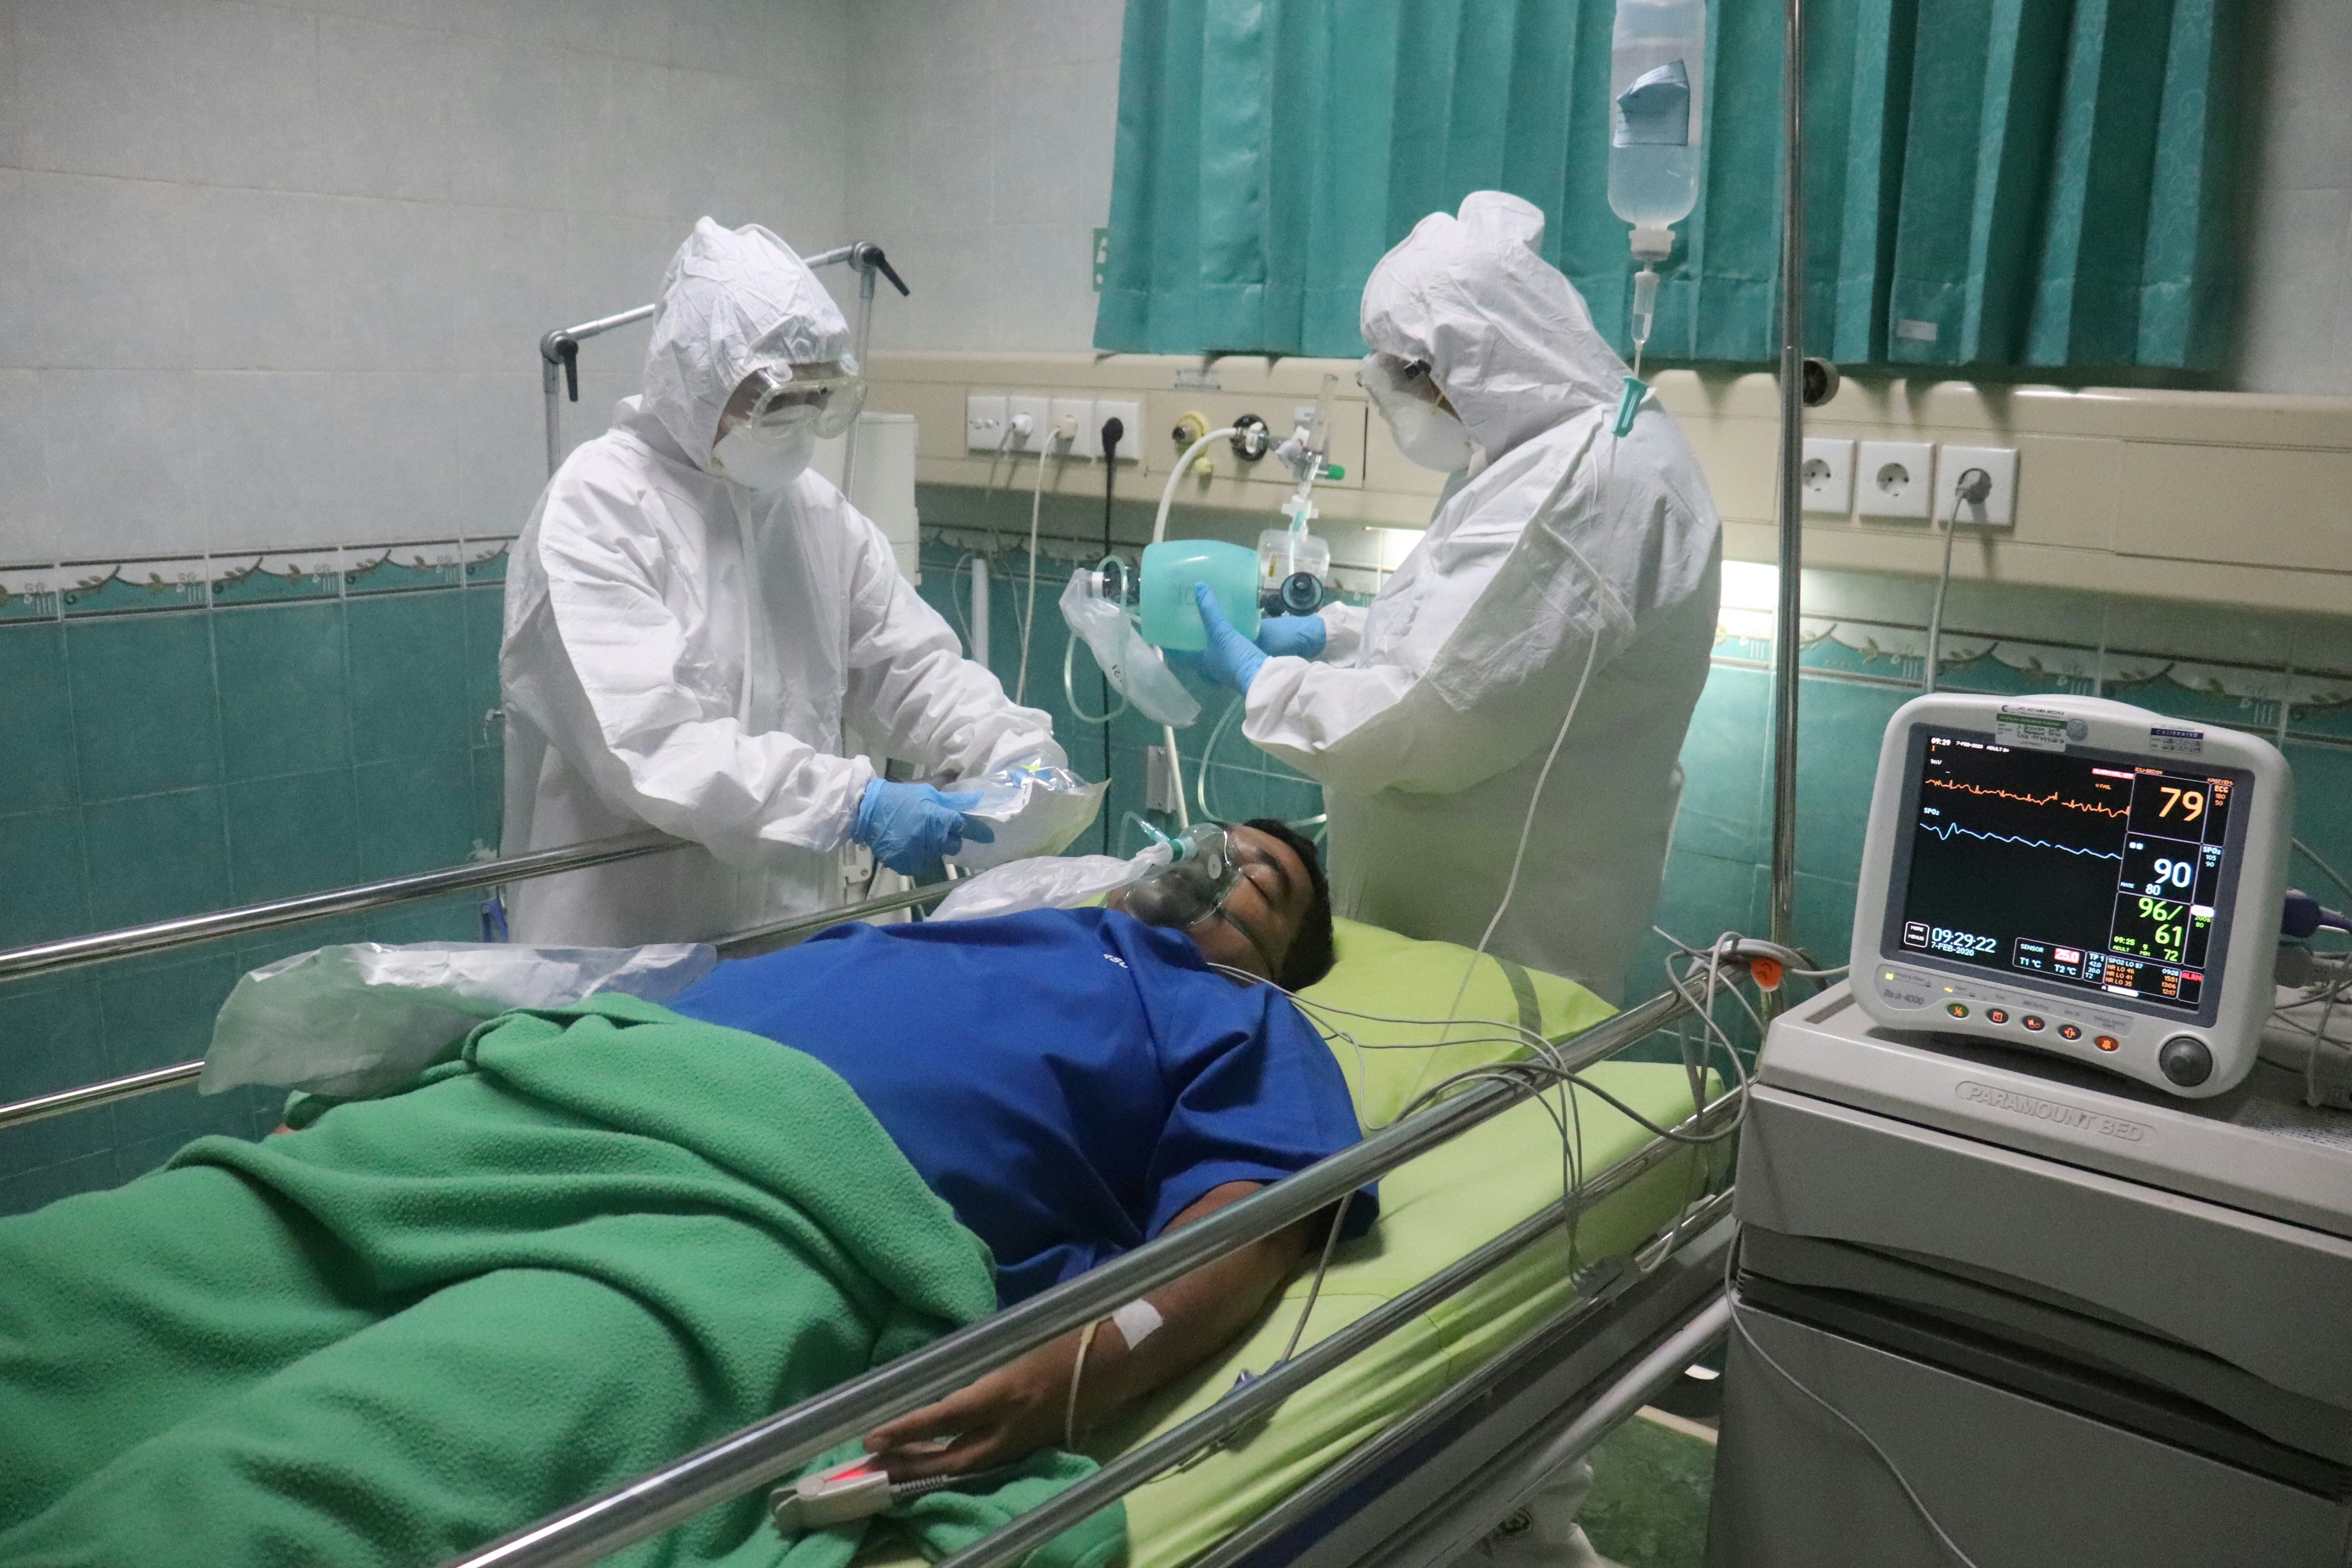 simulated covid-19 patients are in the ICU room</p>
<p>*) Gambar Pasien adalah model, bukan pasien yg sebenarnya. karena ini saat simulasi penanganan covid-19″ style=”max-width:430px;float:left;padding:10px 10px 10px 0px;border:0px;”>Drug addiction is a complex problem with serious consequences for folks and community. Its factors tend to be multi-faceted and need several ways to prevention and treatment. By increasing awareness, improving training, enhancing access to therapy, and applying stricter regulations, society usually takes considerable actions toward reducing the prevalence and effect of medicine addiction. Combating medication addiction necessitates collective attempts from governing bodies, medical experts, communities, and folks to mitigate its results and provide assistance to those affected.</p>
        </div>
                <a href=